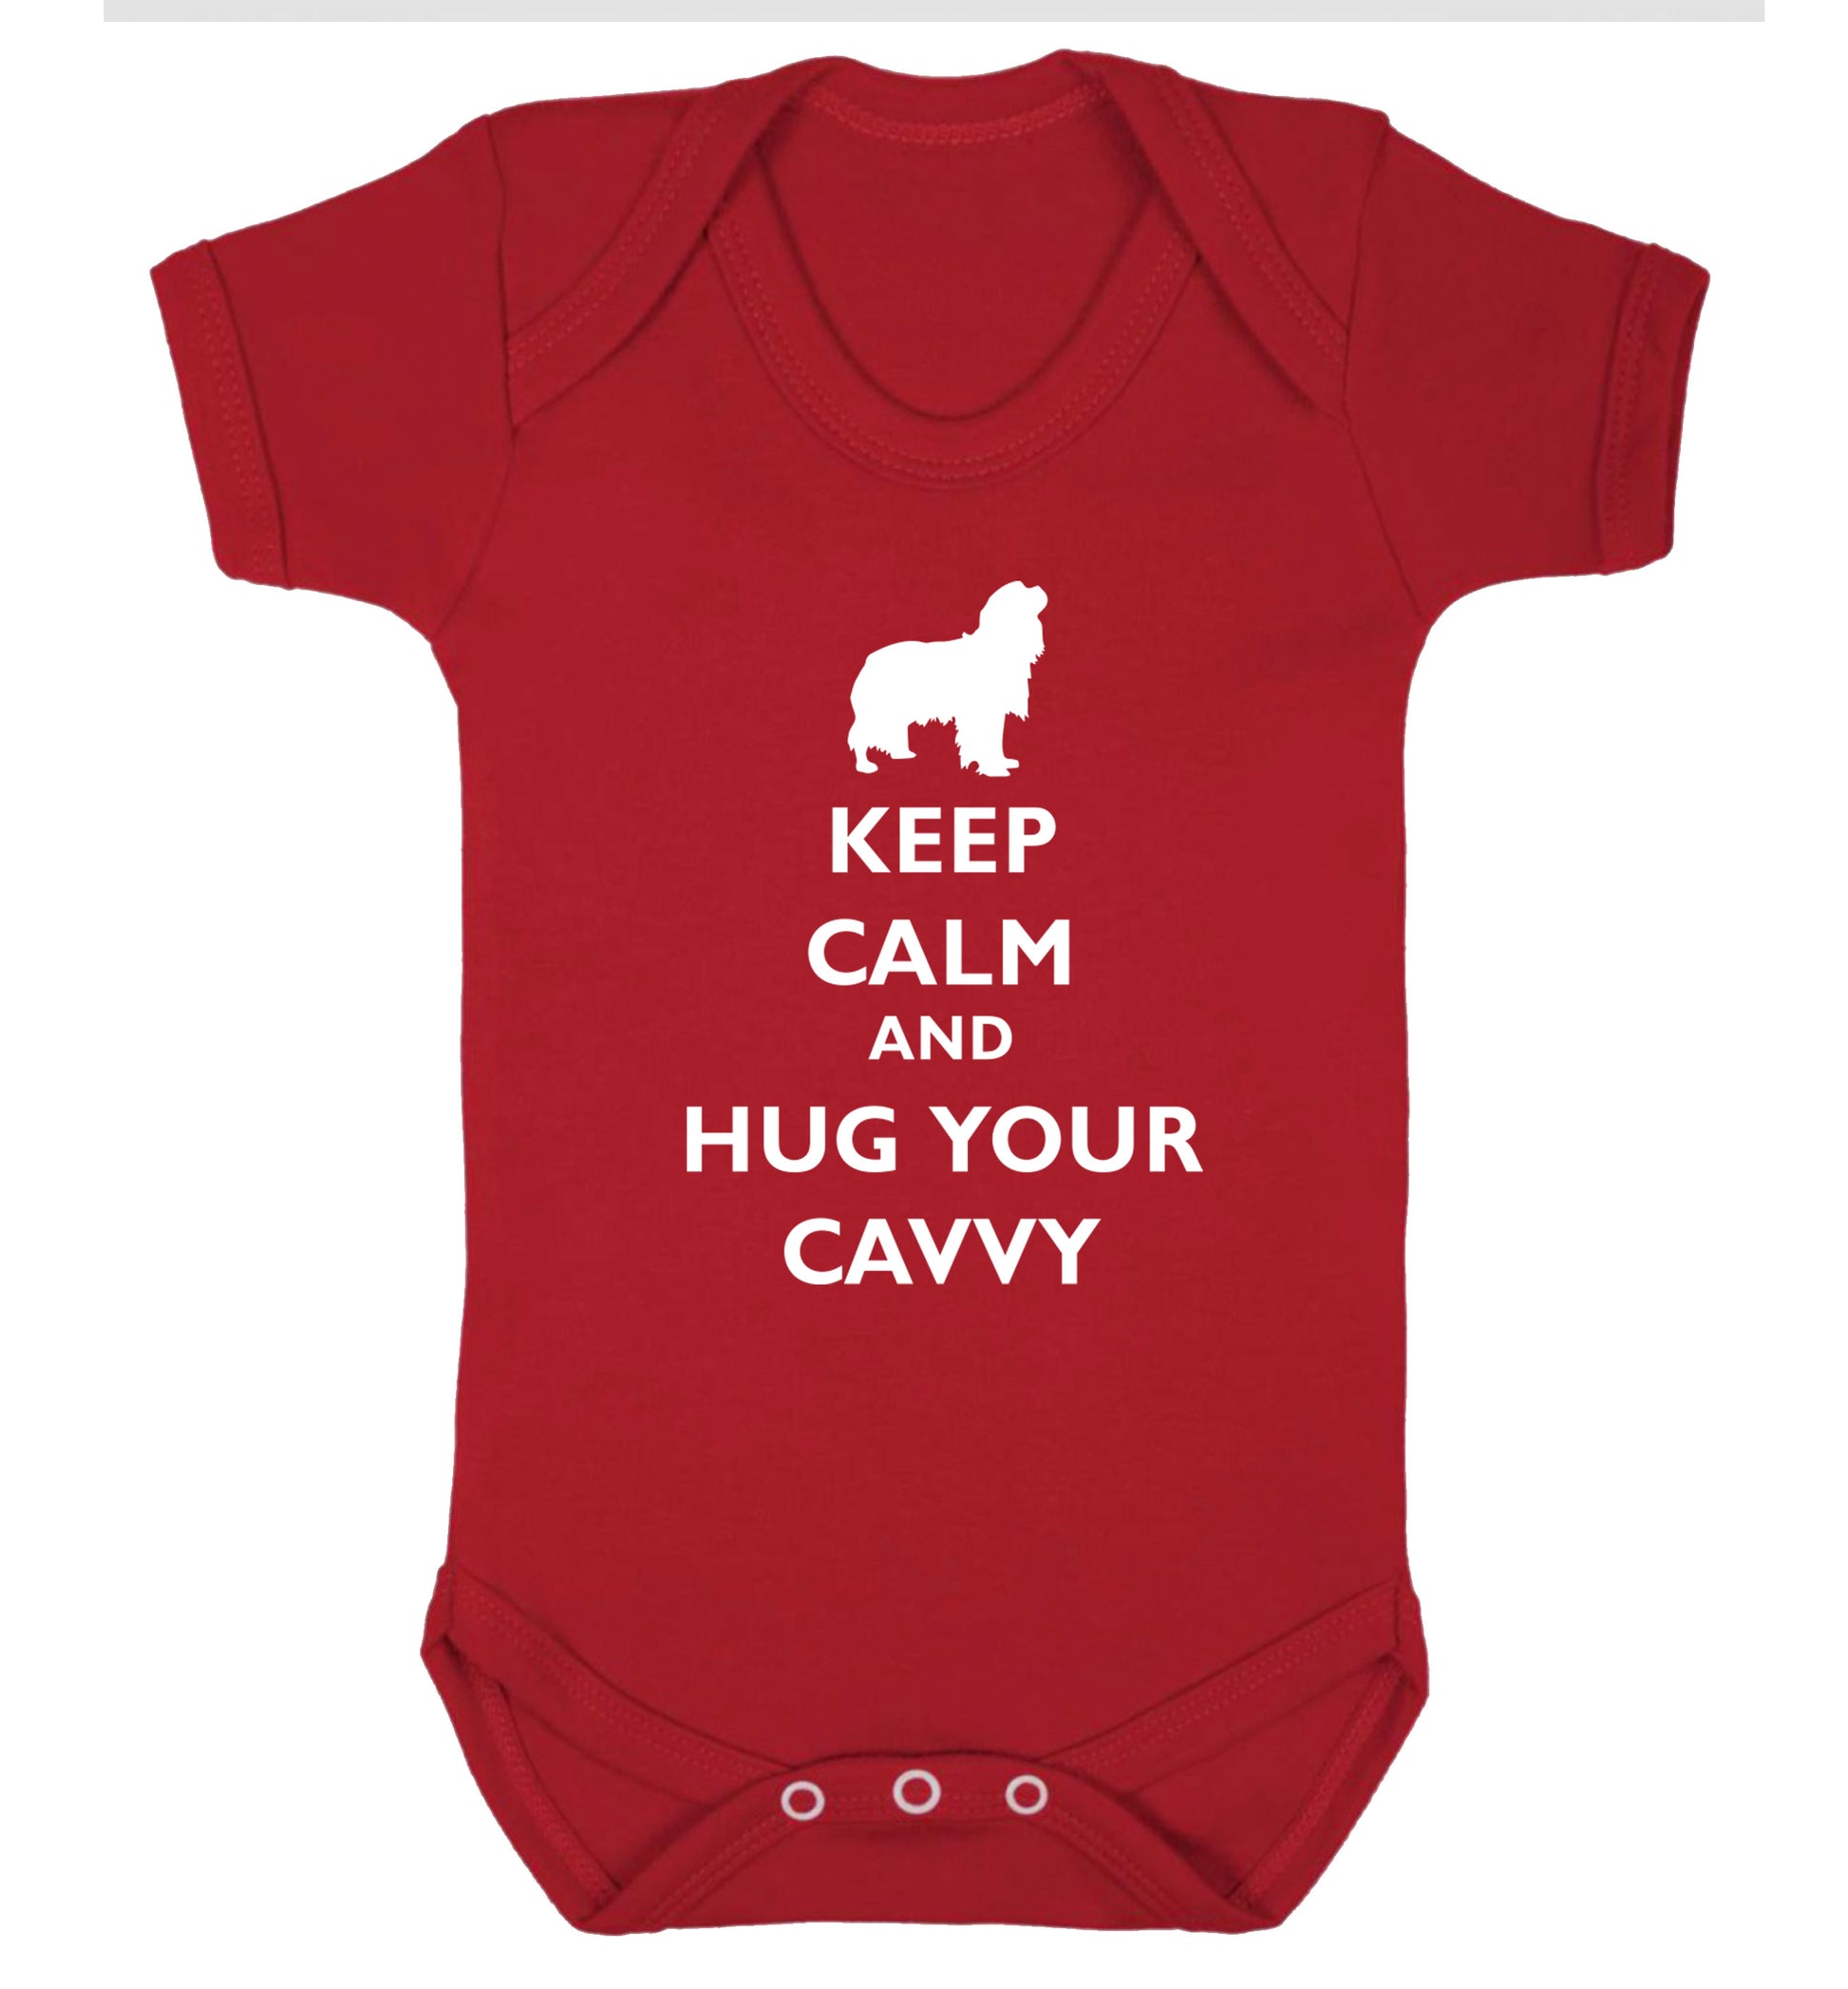 Keep calm and hug your cavvy Baby Vest red 18-24 months